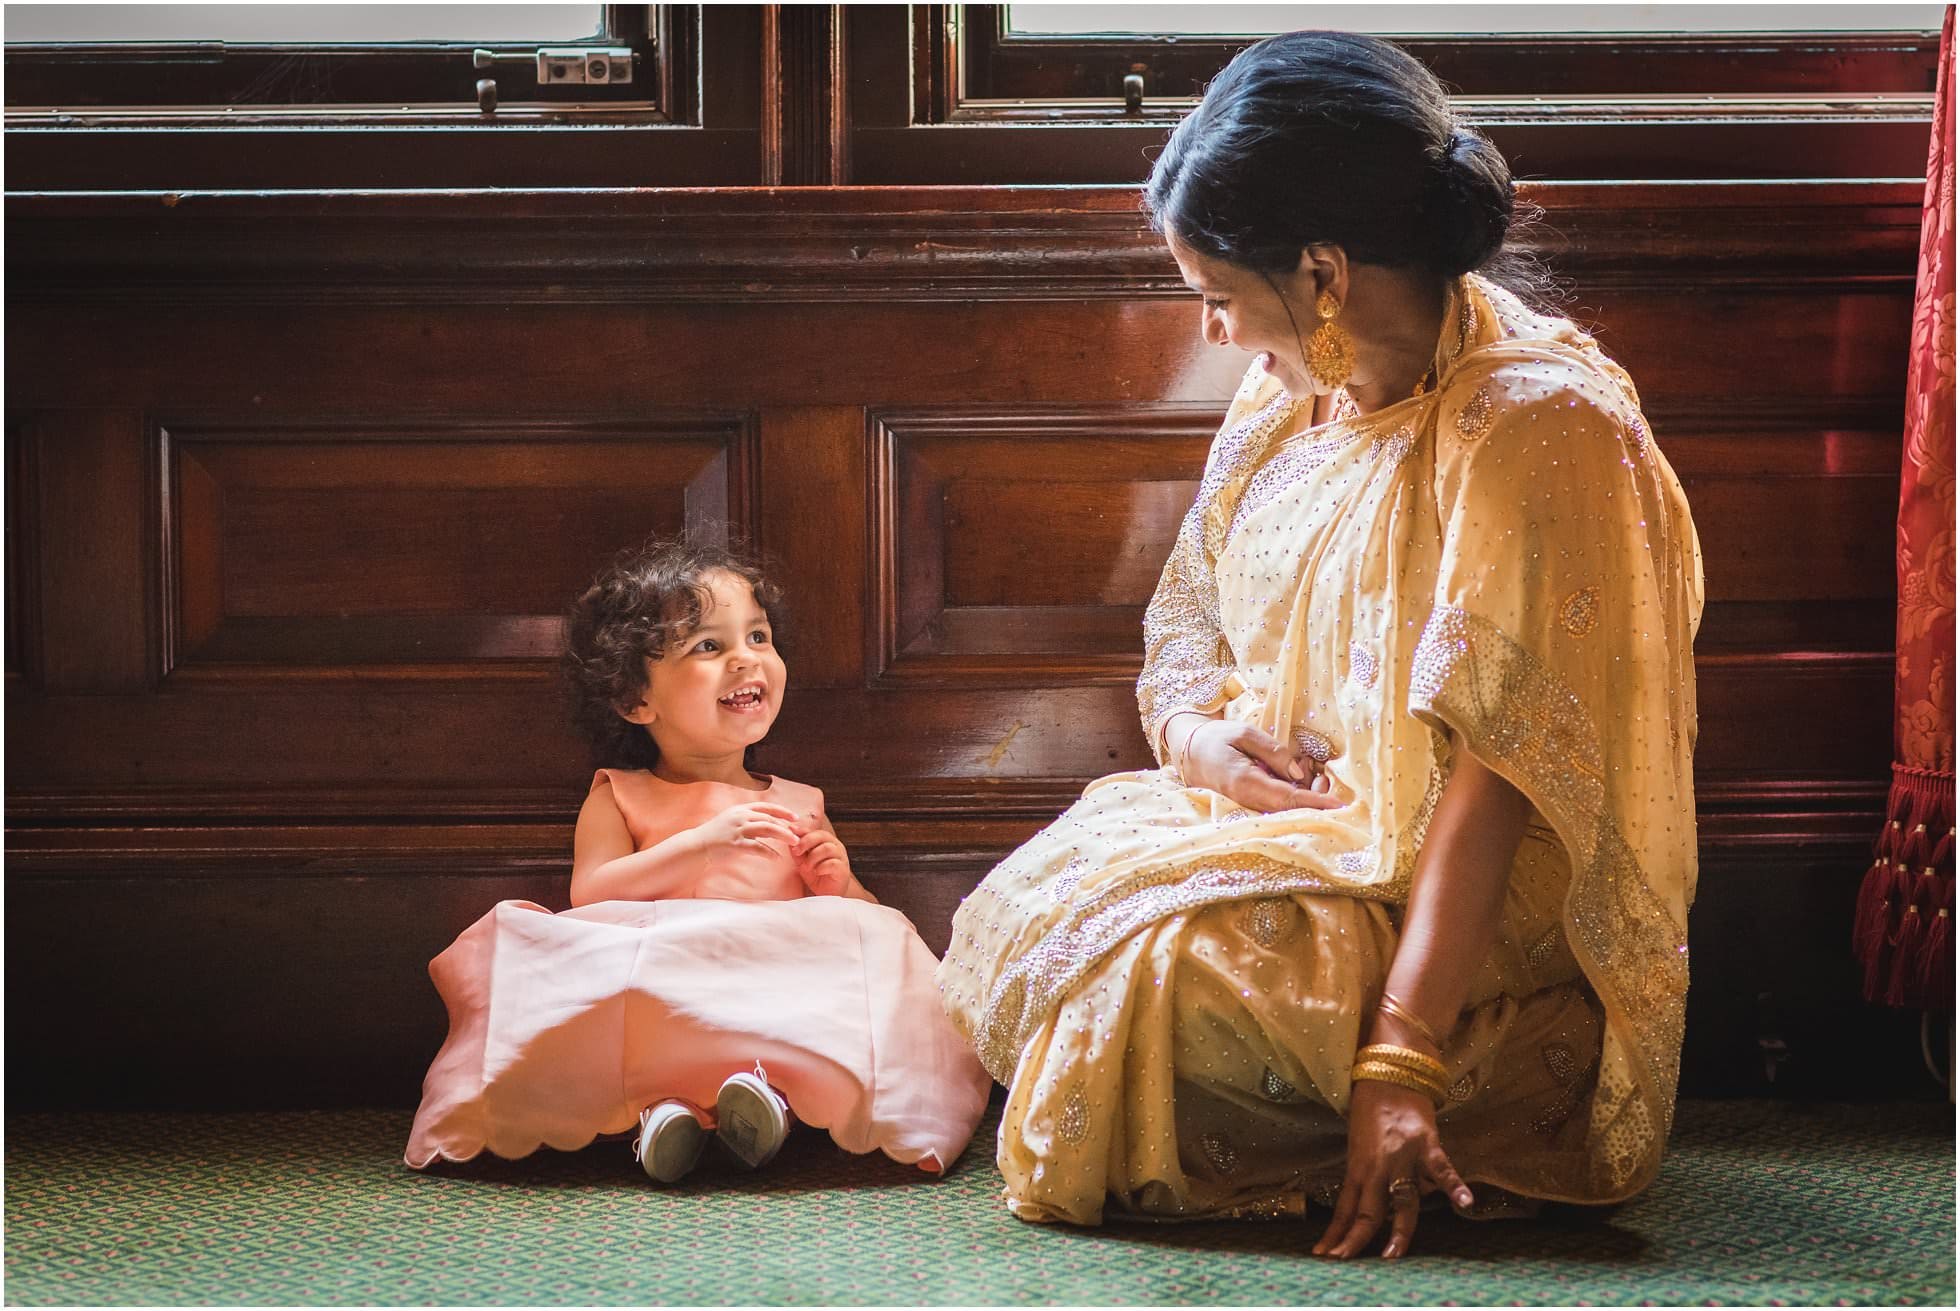 Grandma and granddaughter enjoying each other's company at a wedding at One Whitehall Place, London